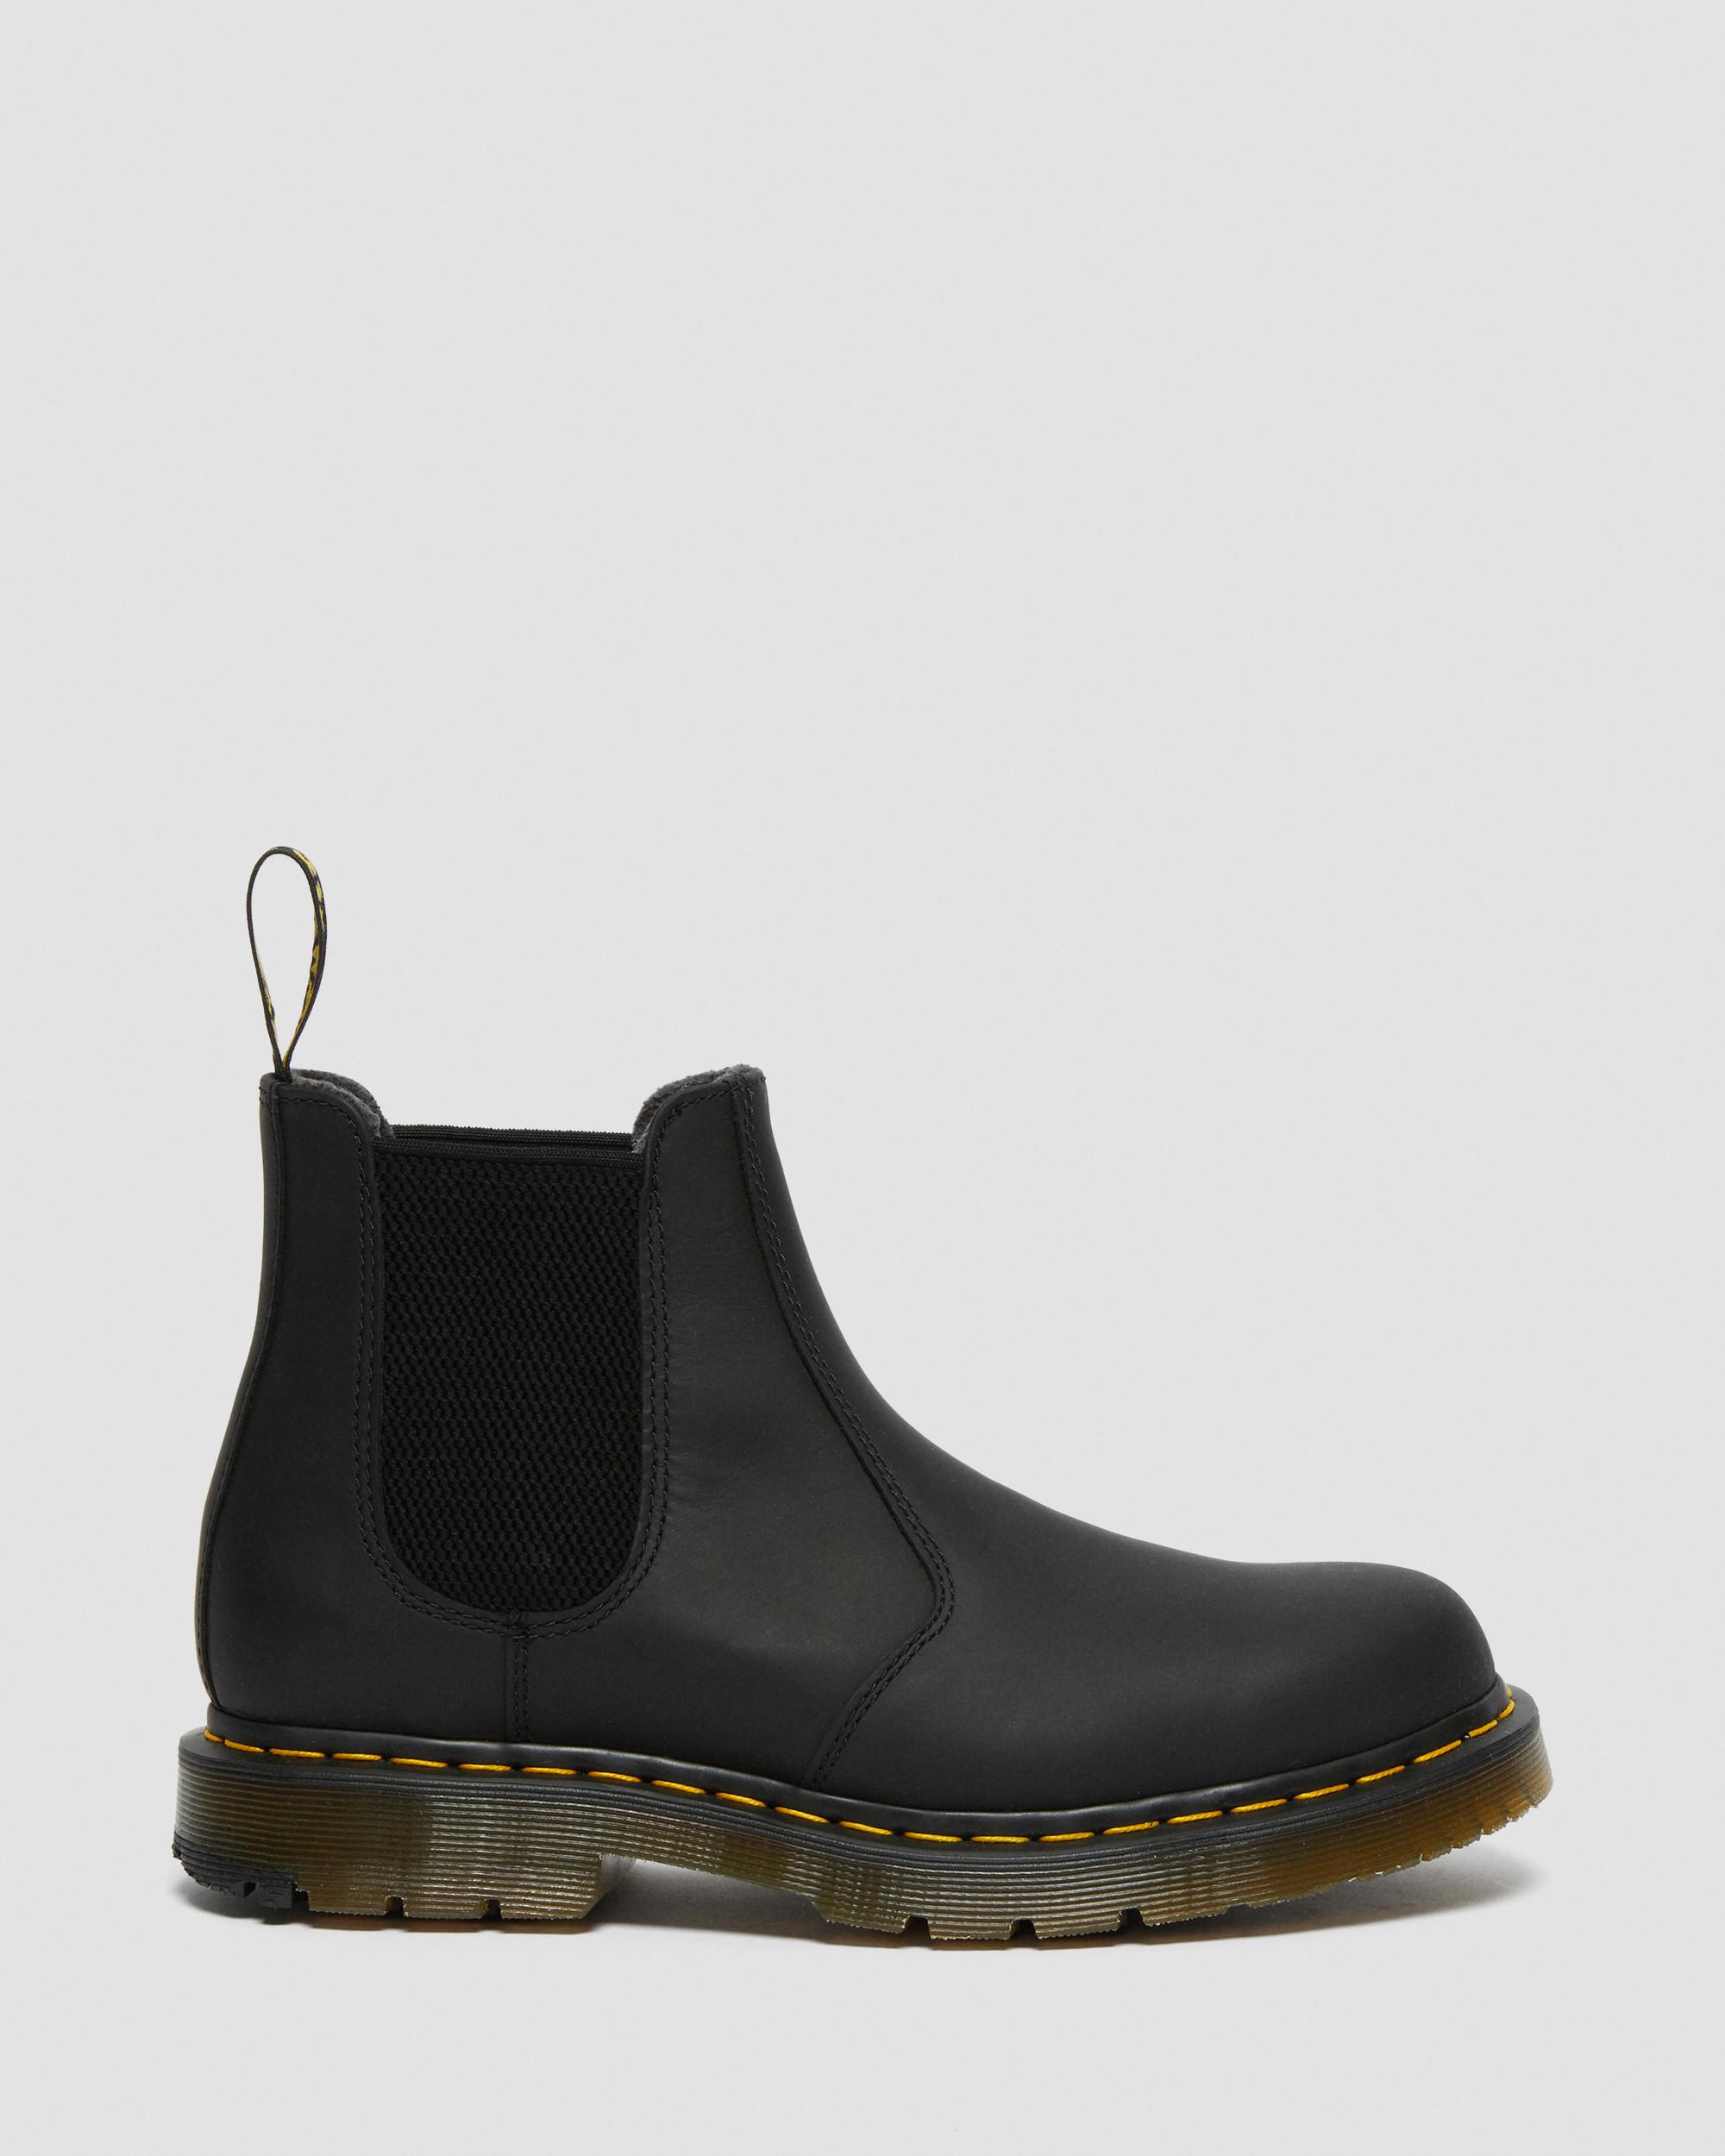 Dr. Martens' Fleece-Lined Boots Are My Go-To Winter Shoe